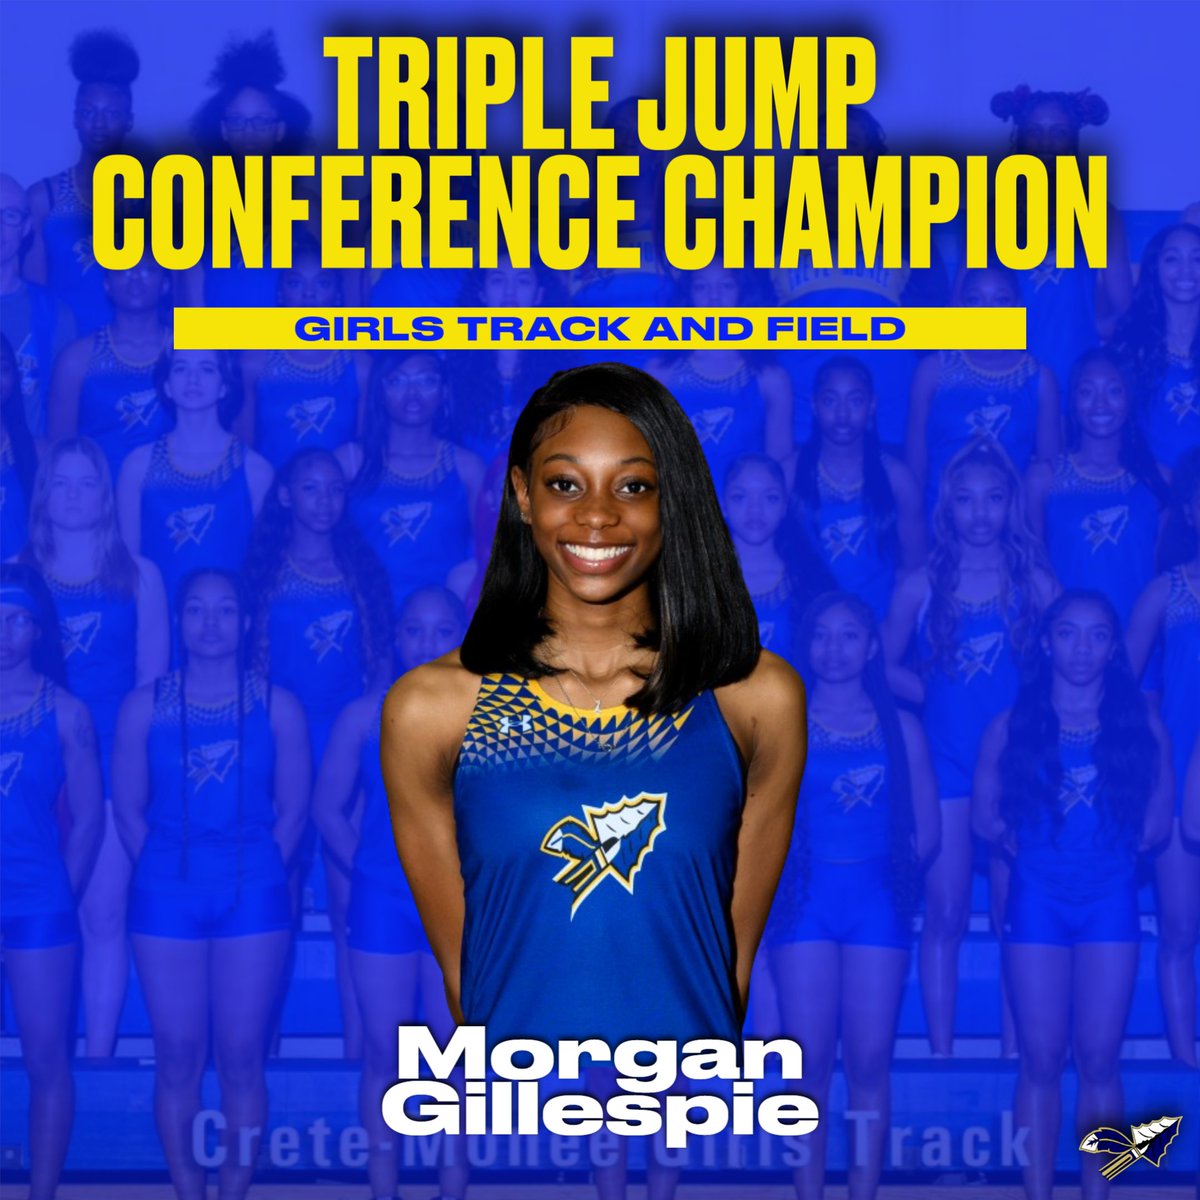 Congratulations to your Southland Athletic Conference Champion in the Triple Jump! #GoWarriors